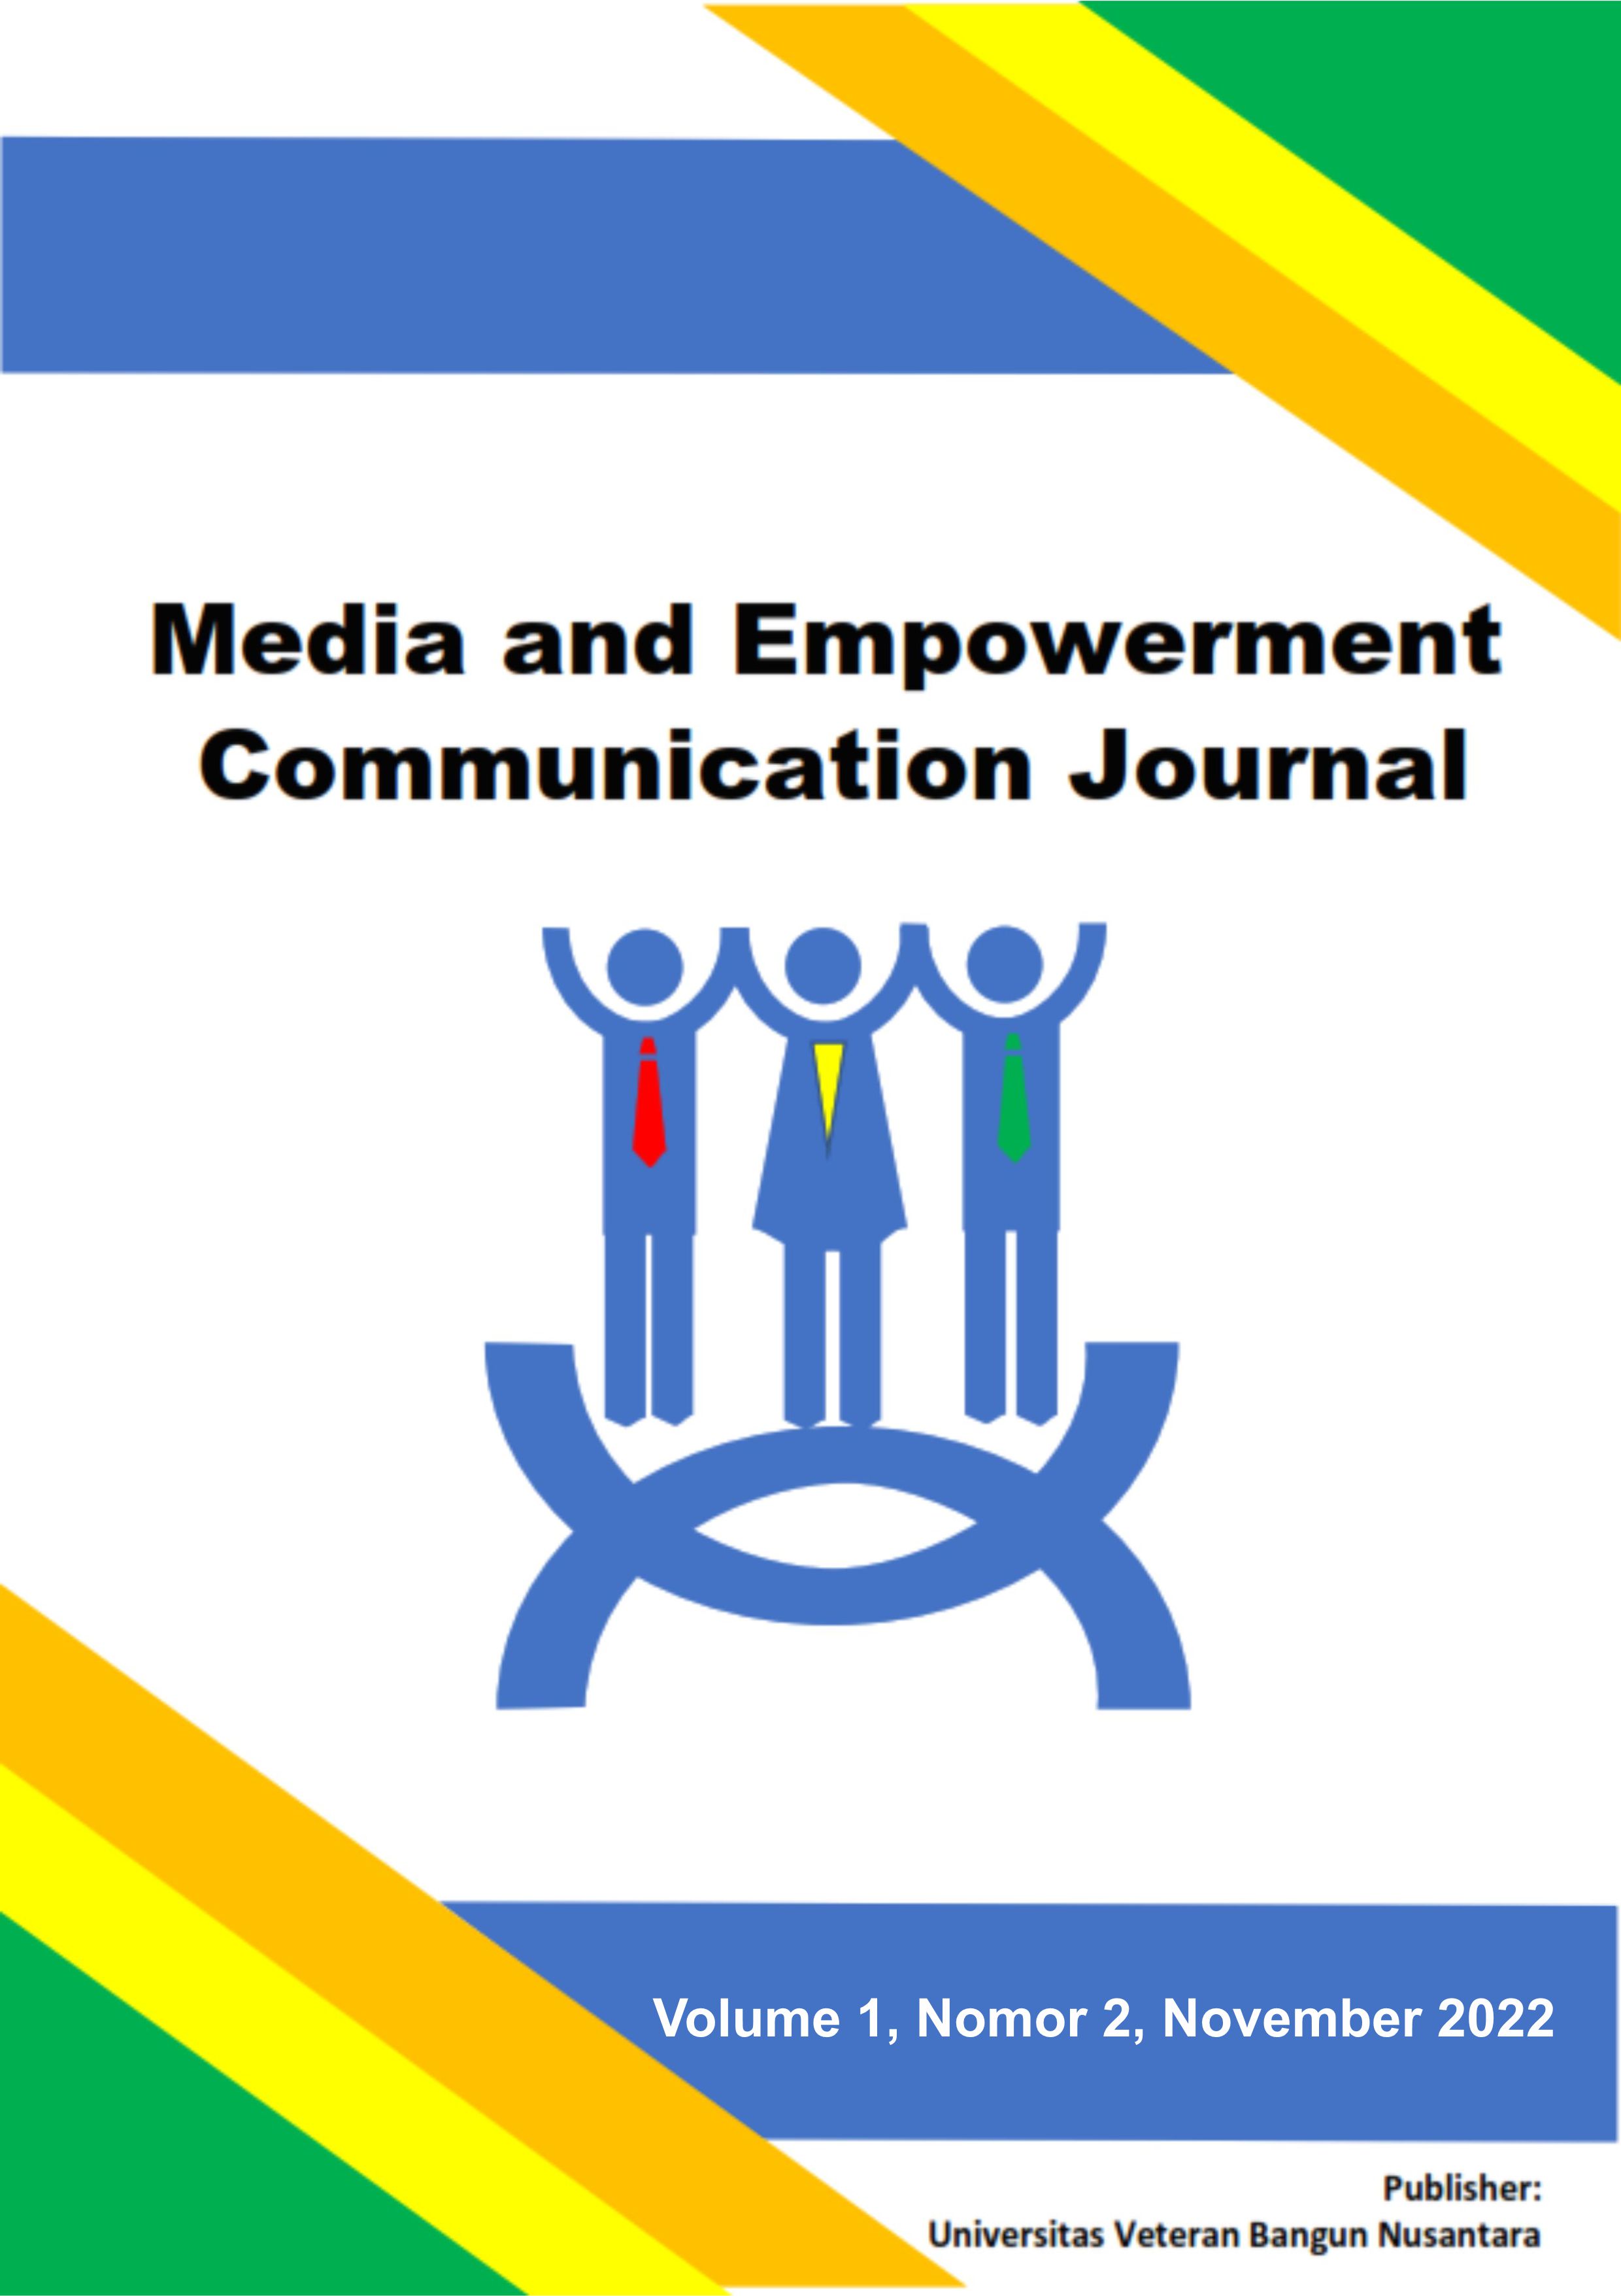 					View Vol. 1 No. 2 (2022): Media and Empowerment Communication Journal
				